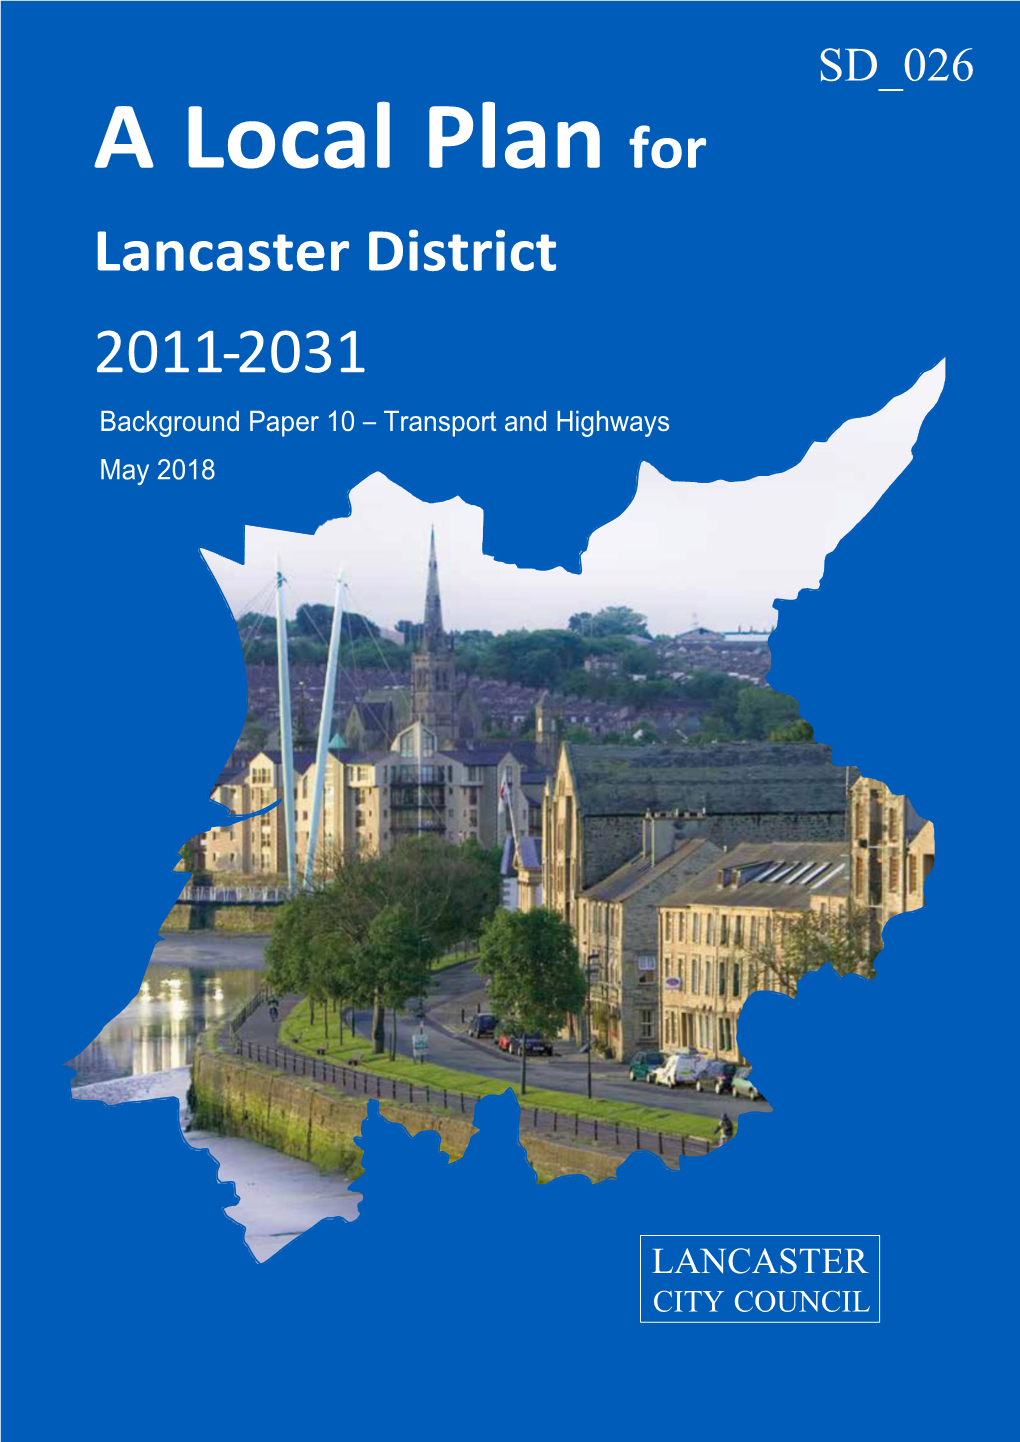 A Local Plan for Lancaster District 2011-2031 Background Paper 10 – Transport and Highways